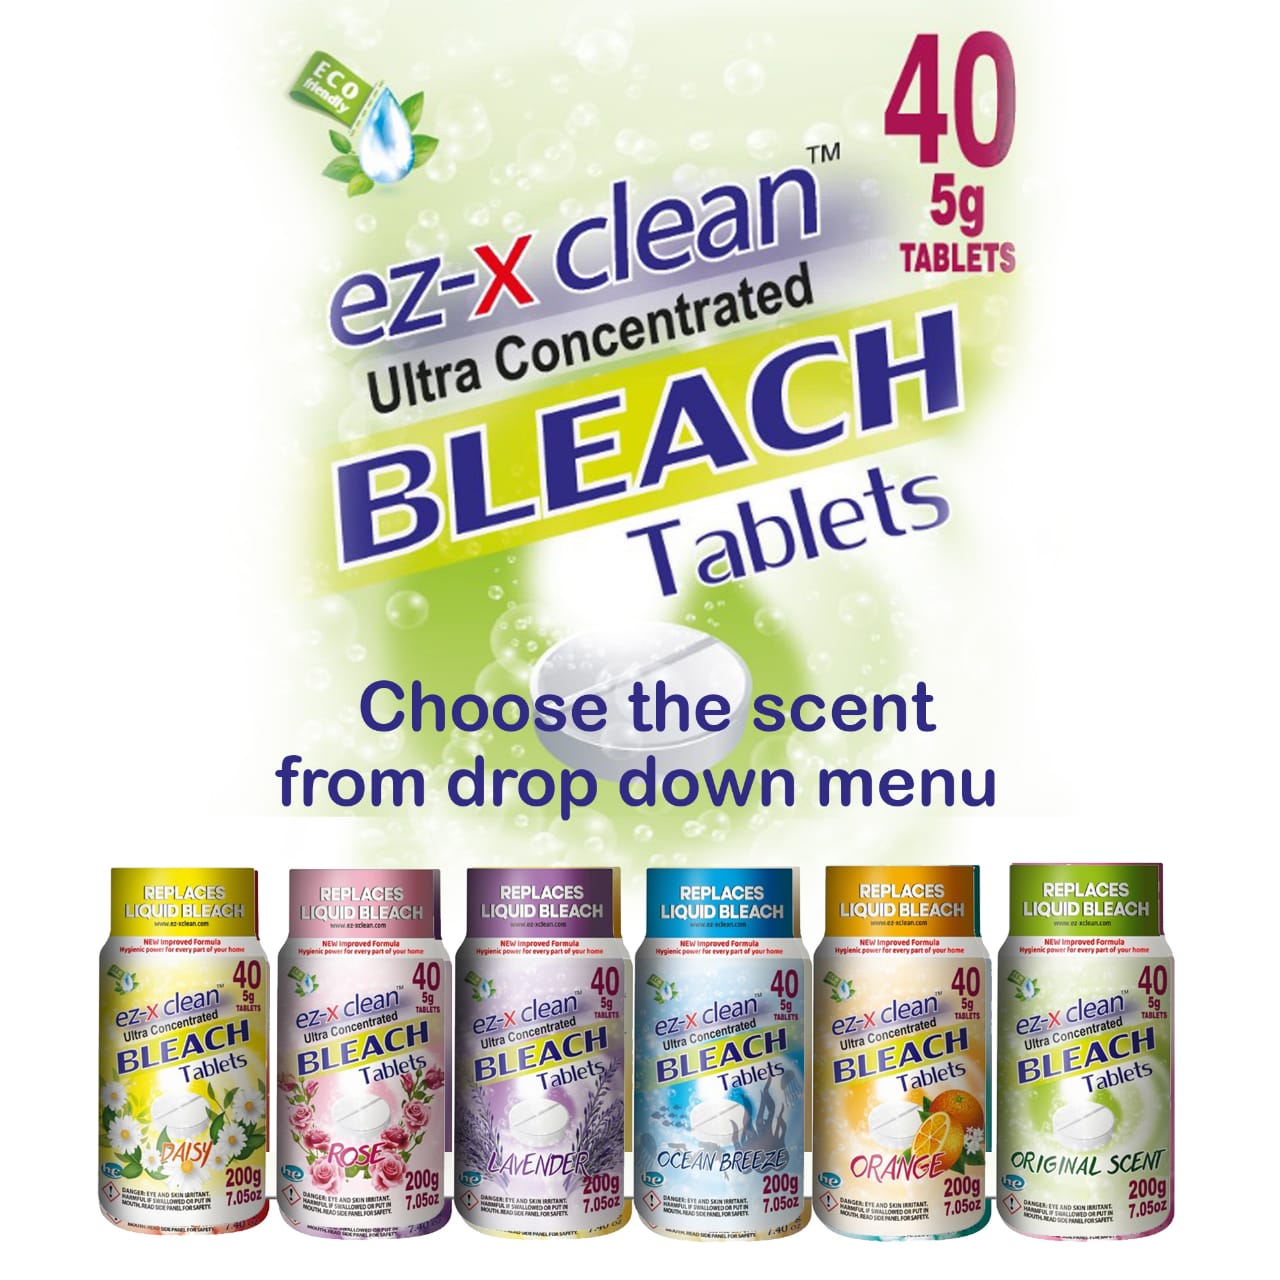 EZ-X CLEAN New and Improved Formula Ultra Concentrated Water Activated Bleach Tablets for Laundry and Multipurpose Cleaning, spring smell